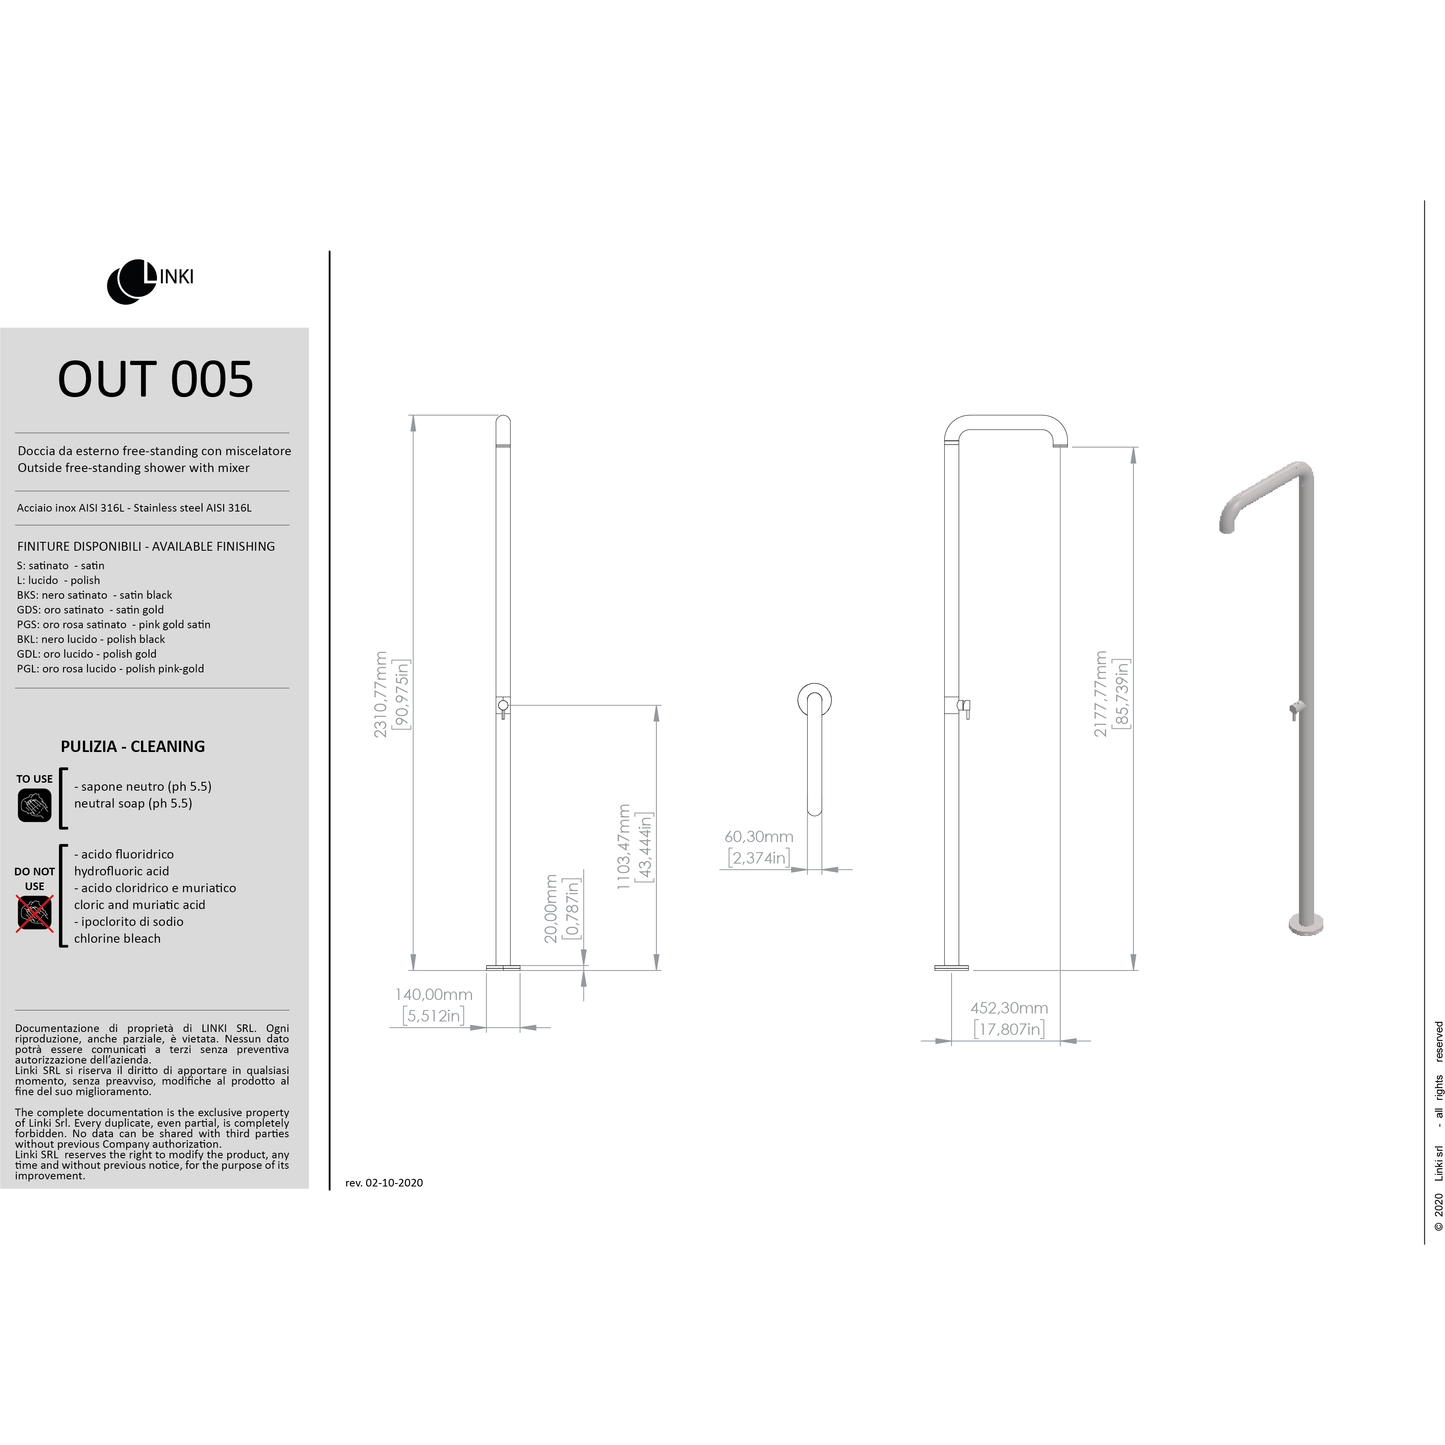 Outdoor freestanding shower OUT005